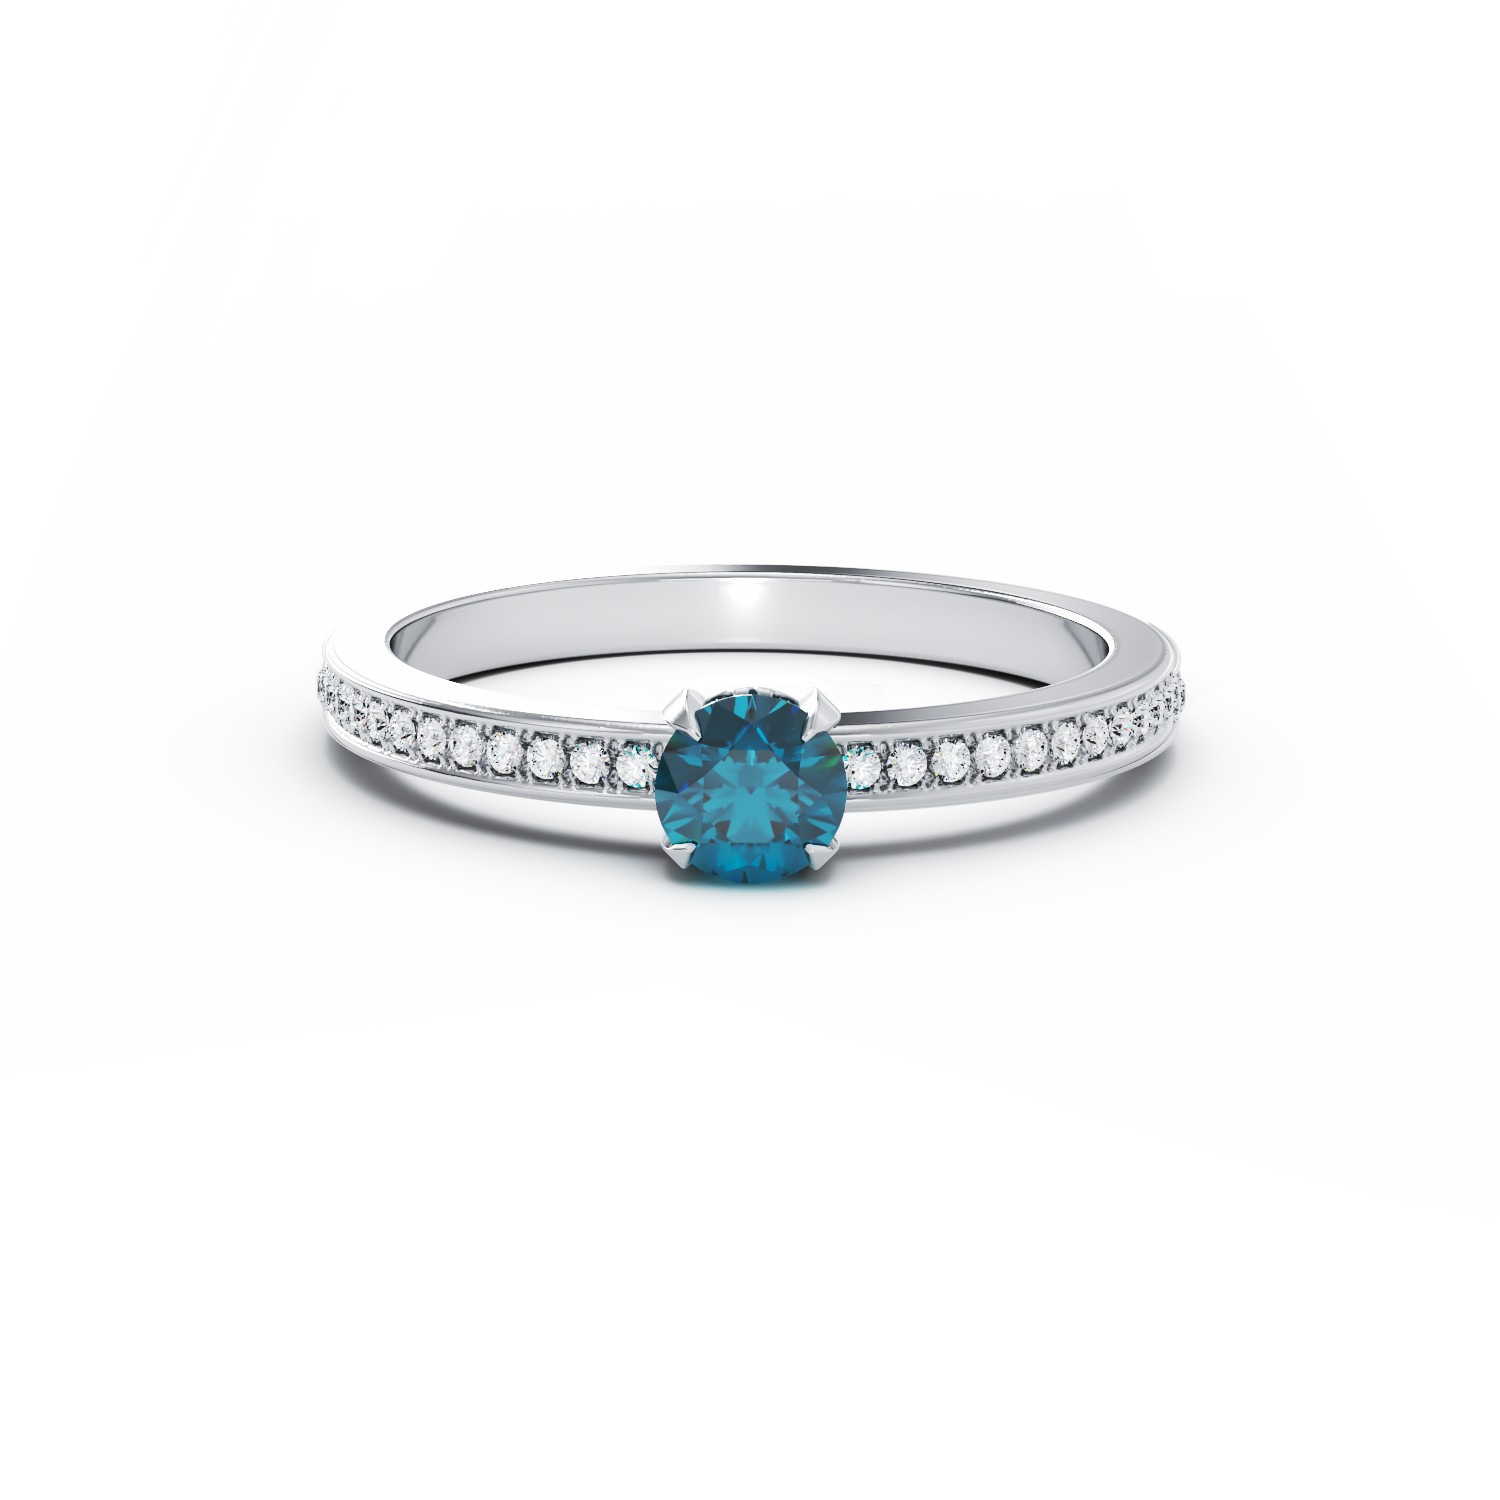 18K white gold engagement ring with 0.32ct blue diamond and 0.19ct Clear diamonds